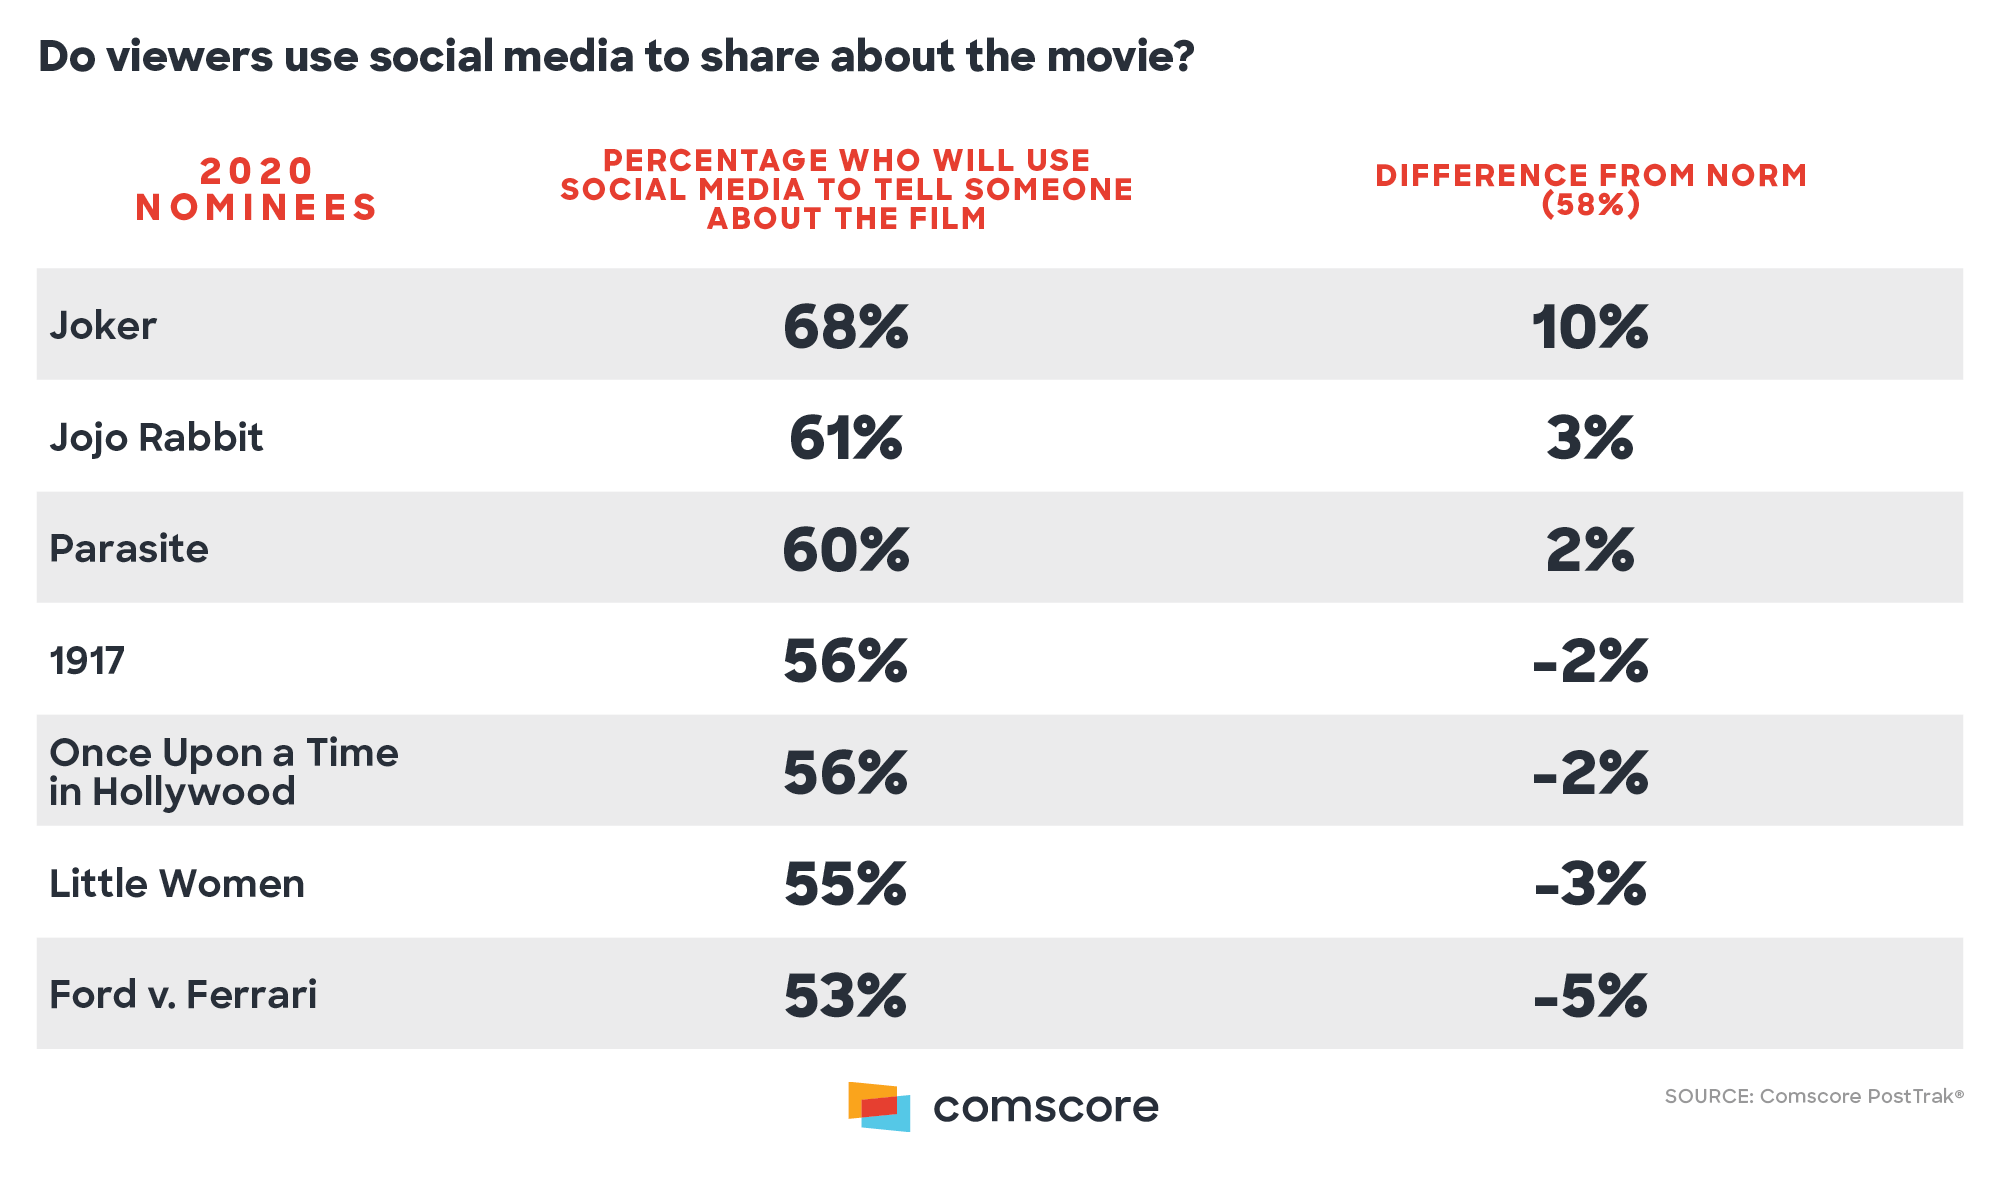 Do Viewers use social media to share about themovie?